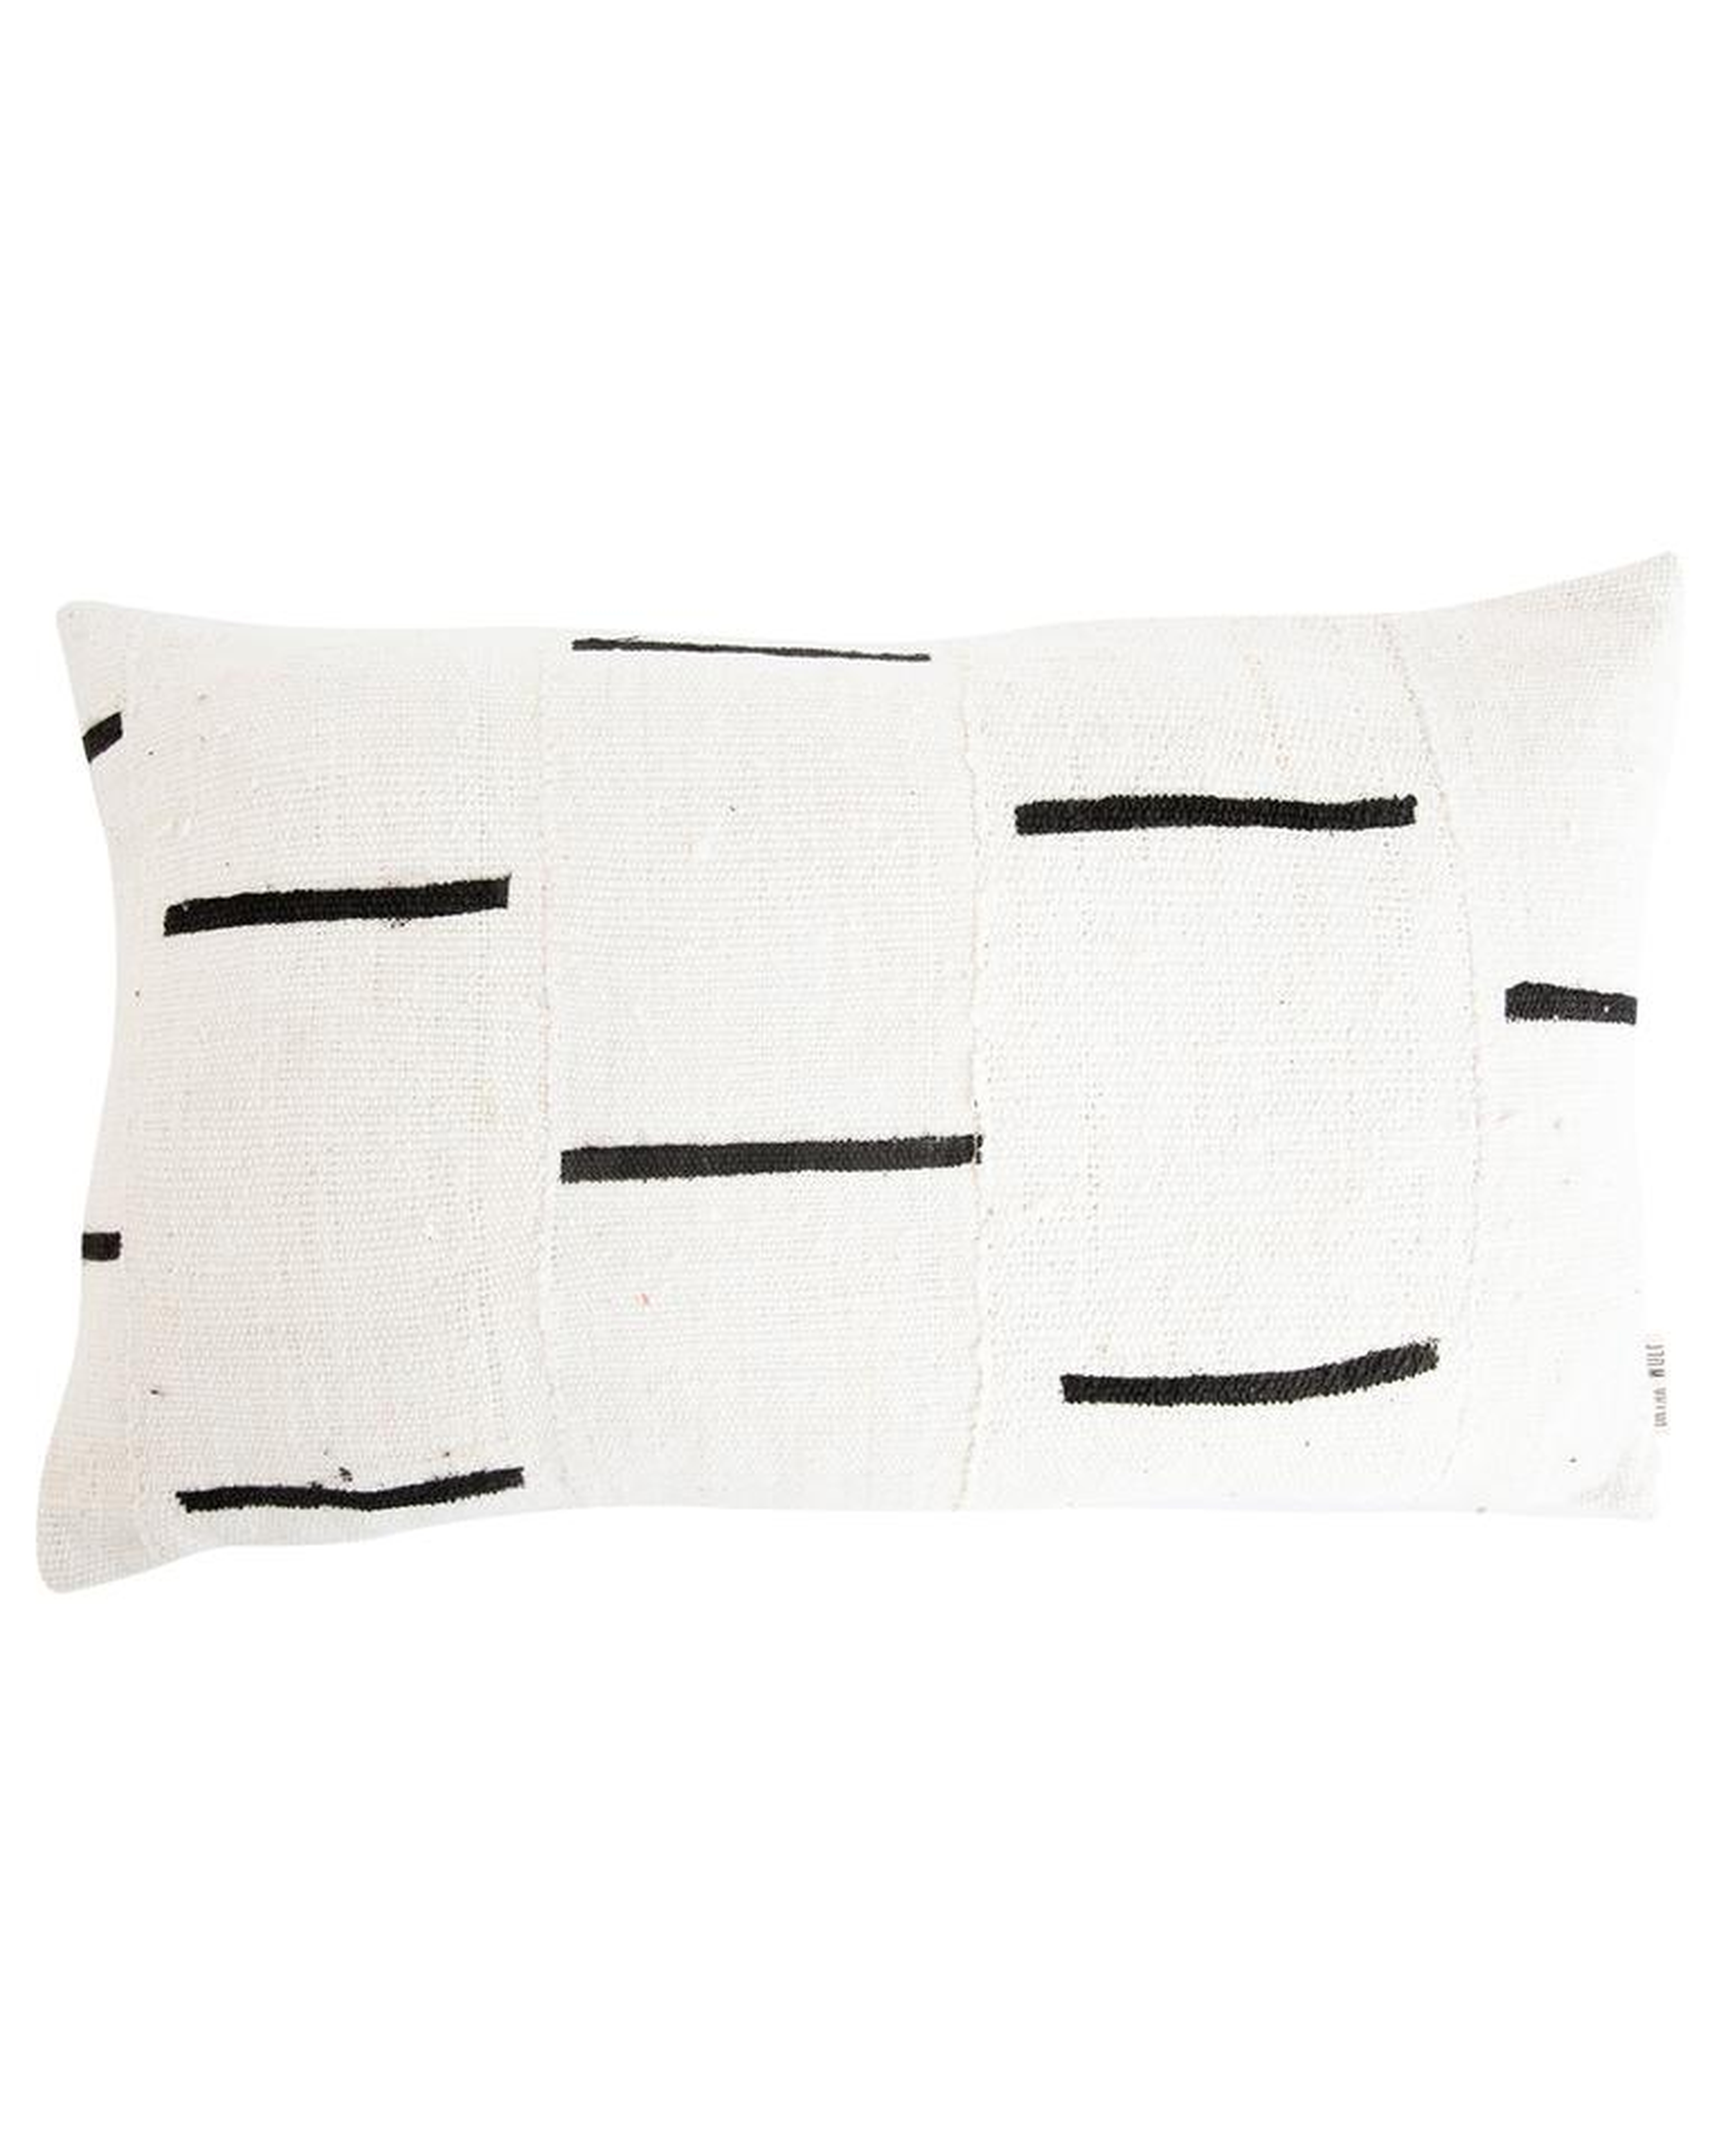 INDU PILLOW WITH INSERT, 12" x 20" - McGee & Co.